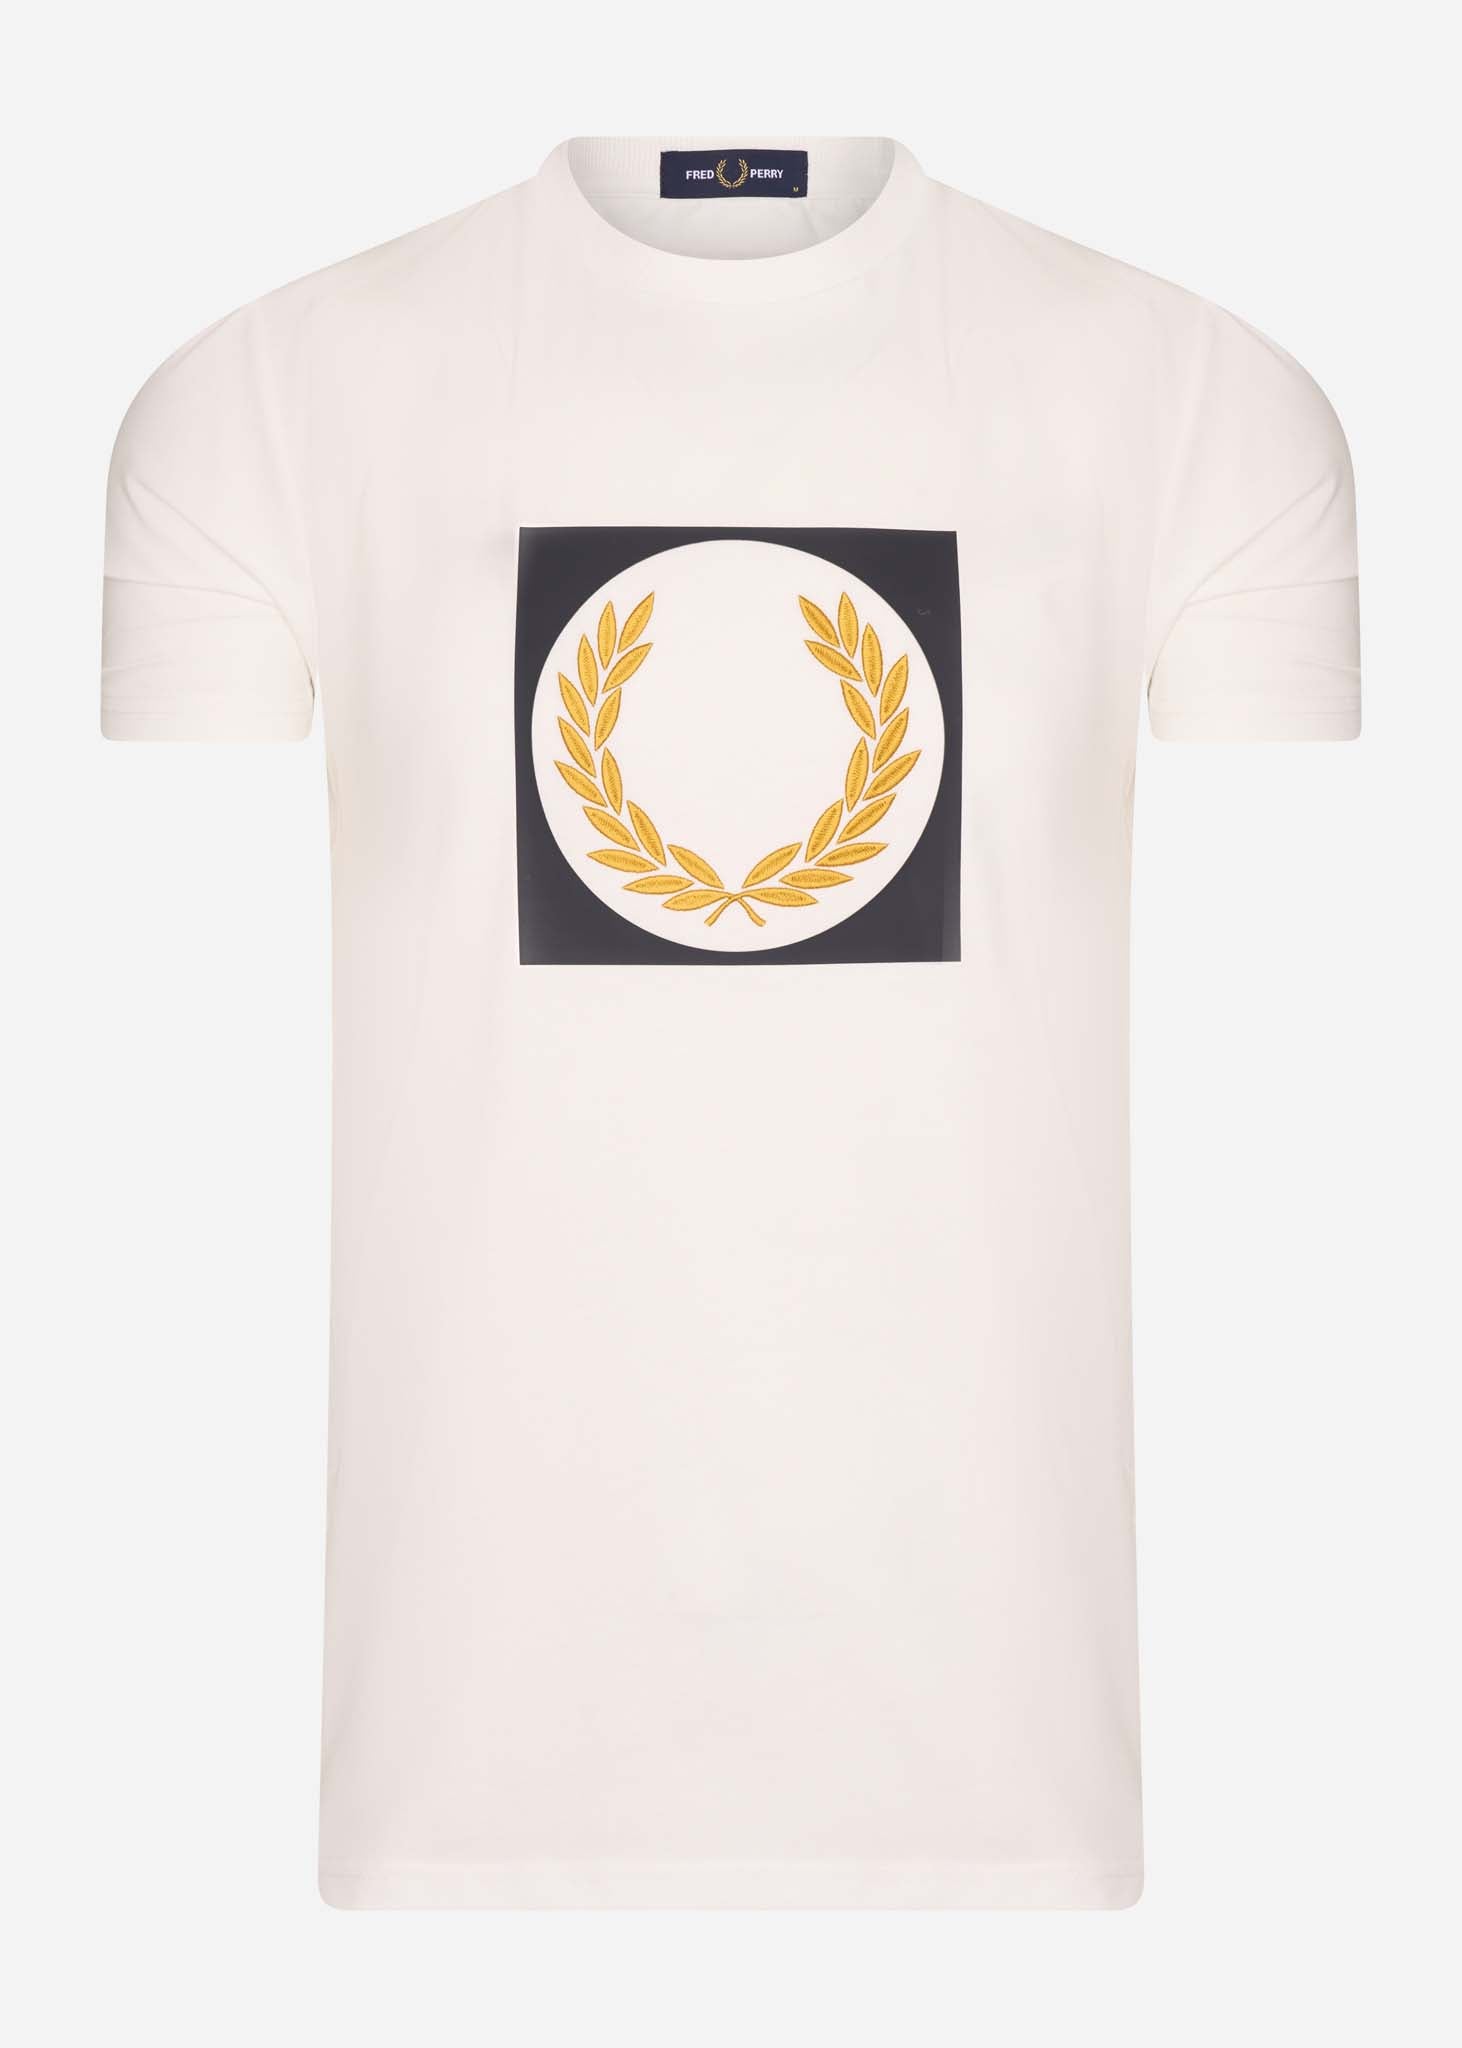 fred perry t-shirt white 